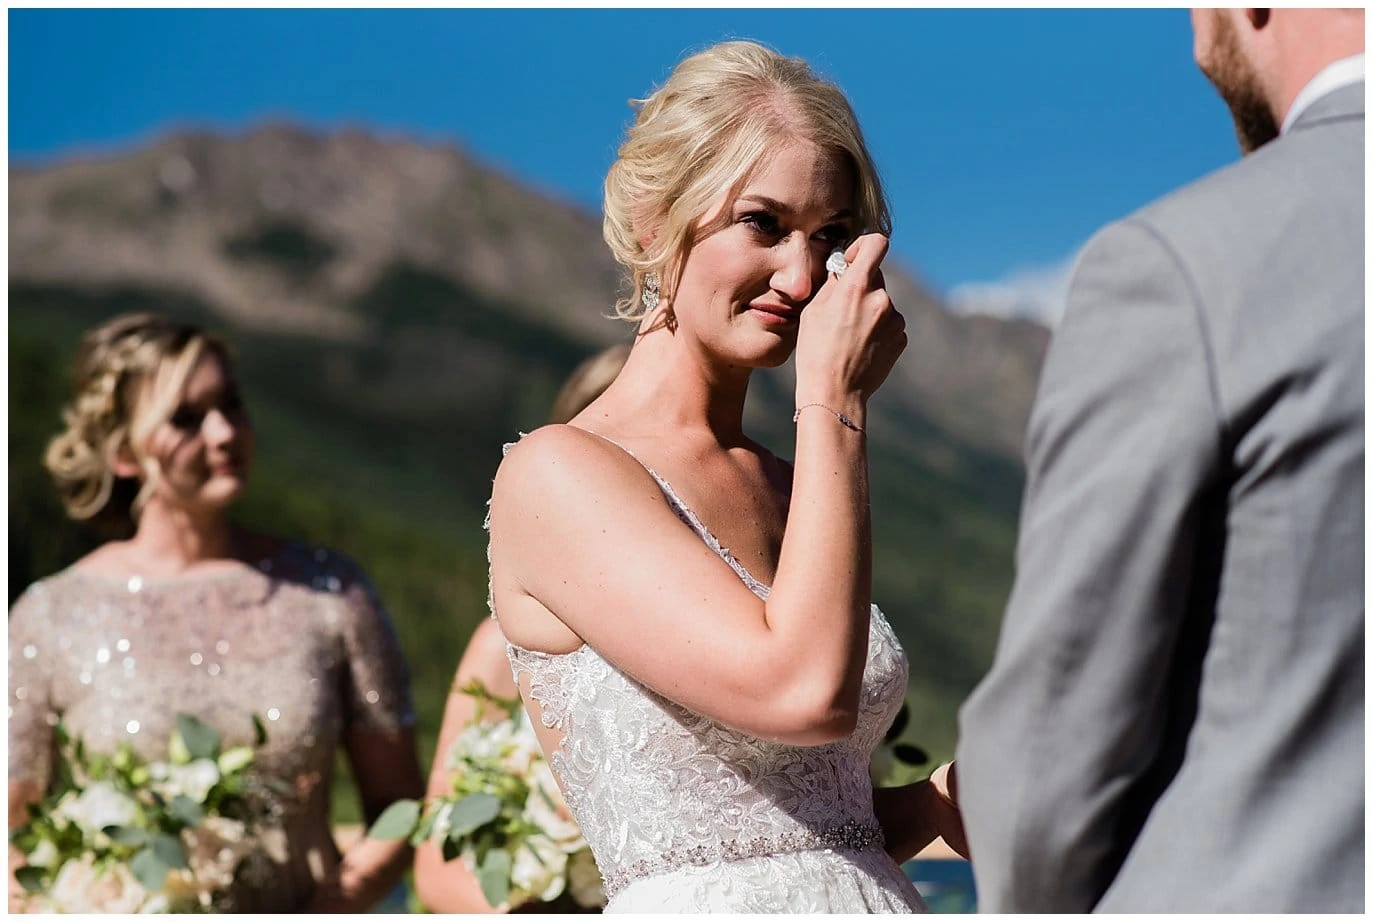 emotional bride during vows at Piney River Ranch wedding by Beaver Creek wedding photographer Jennie Crate, Photographer